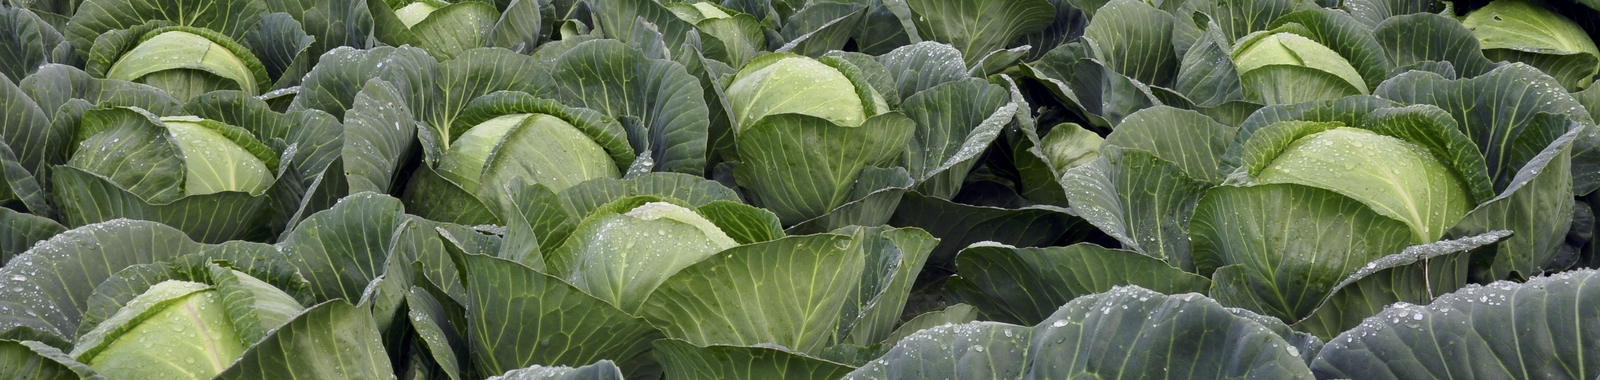 How crop nutrition affects vegetable brassicas